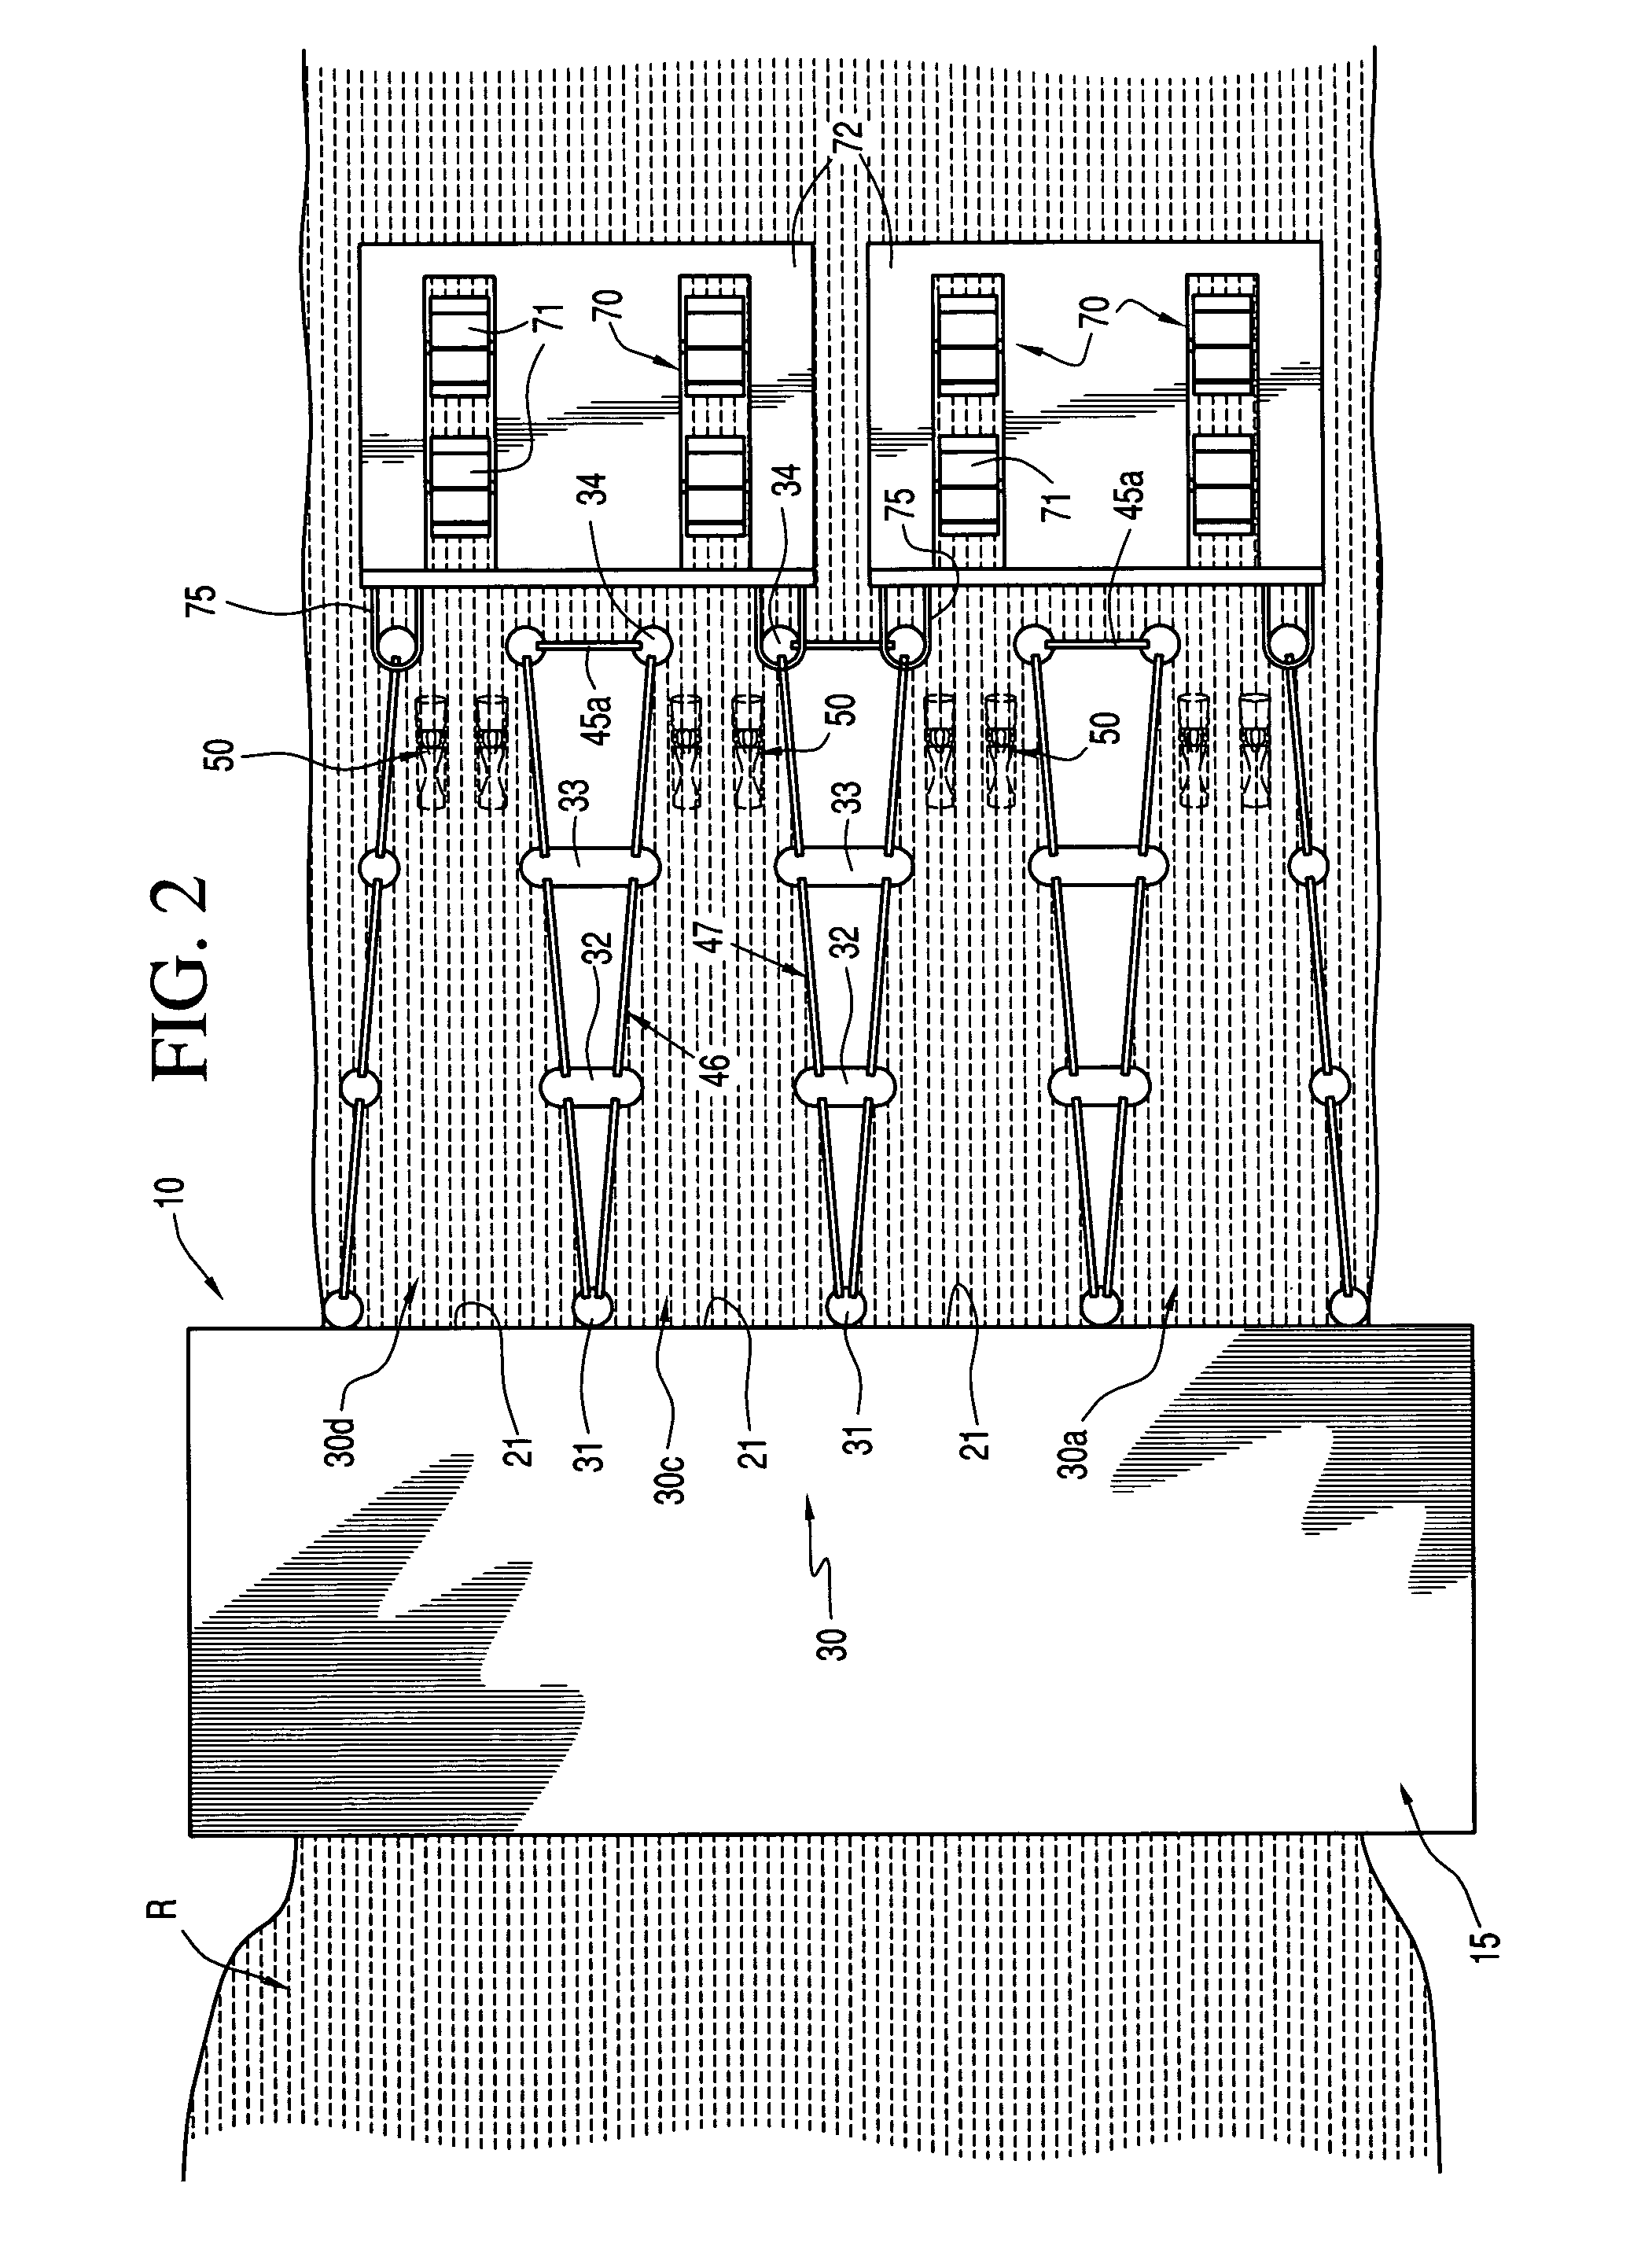 Apparatus for hydroelectric power production expansion